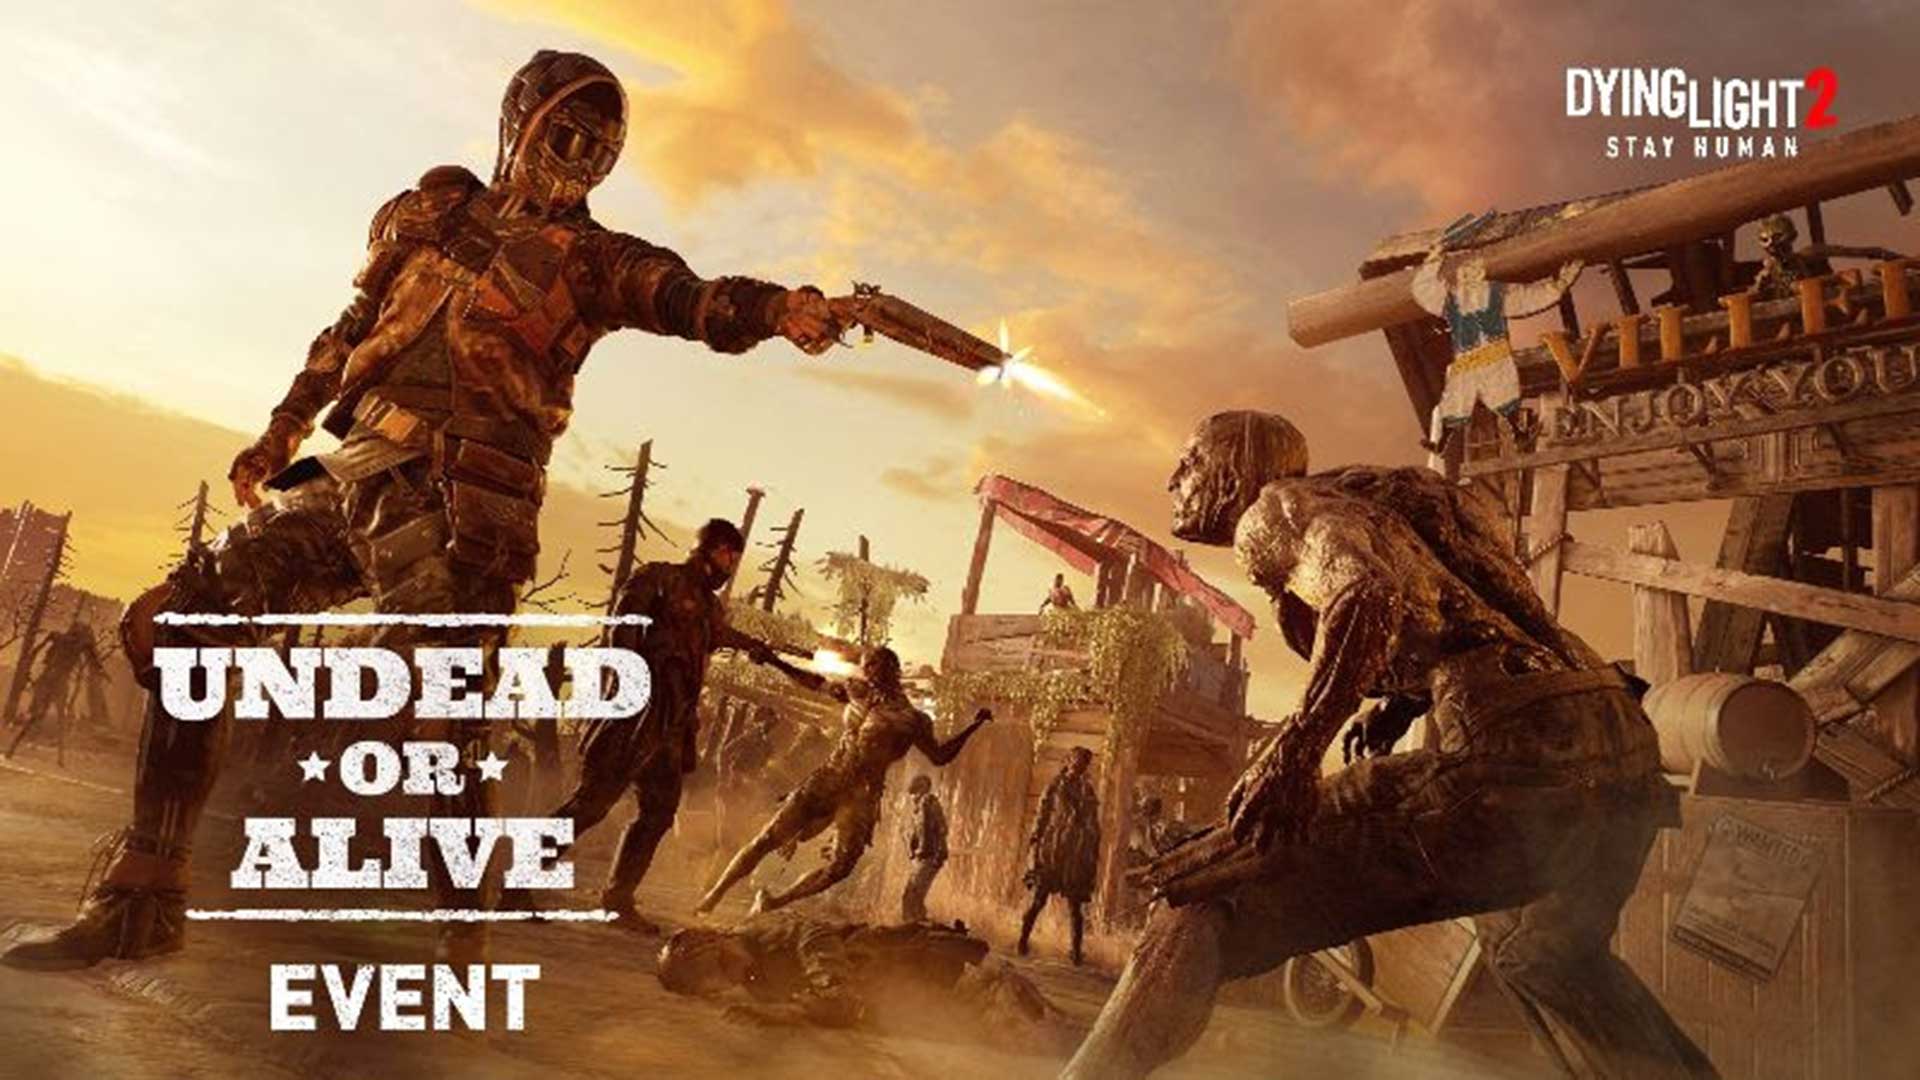 Dying Light will have special items and event in